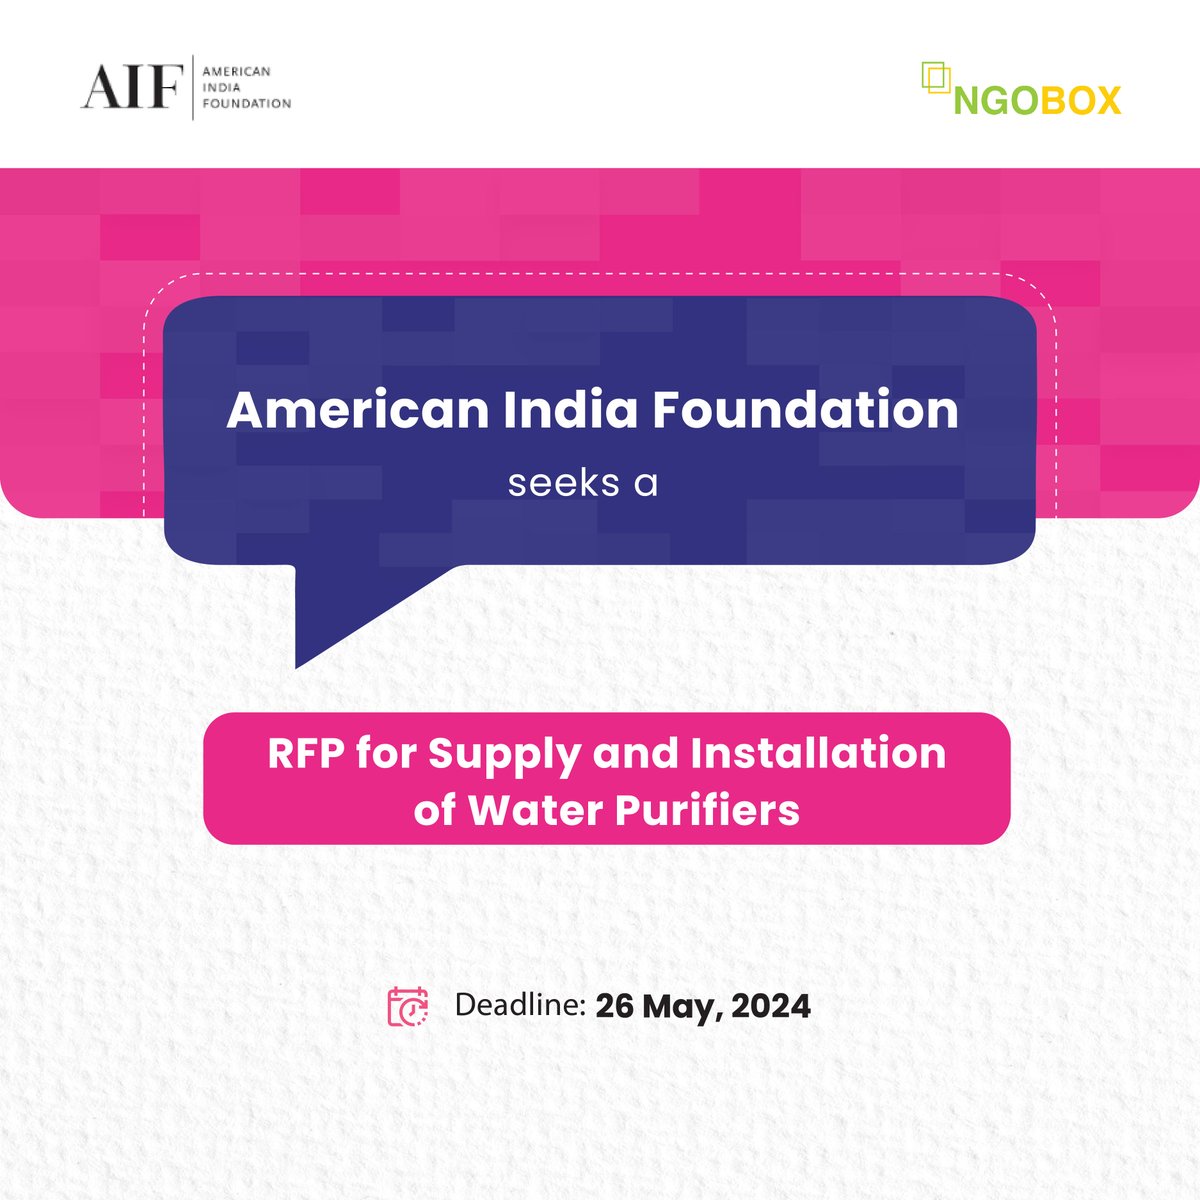 📢 Attention! The American India Foundation is inviting proposals for the Supply and Installation of Water Purifiers. If your organization can deliver top-notch water purification solutions, we want to hear from you! Deadline: May 26, 2024. Apply now: ngobox.org/full_rfp_eoi_R…